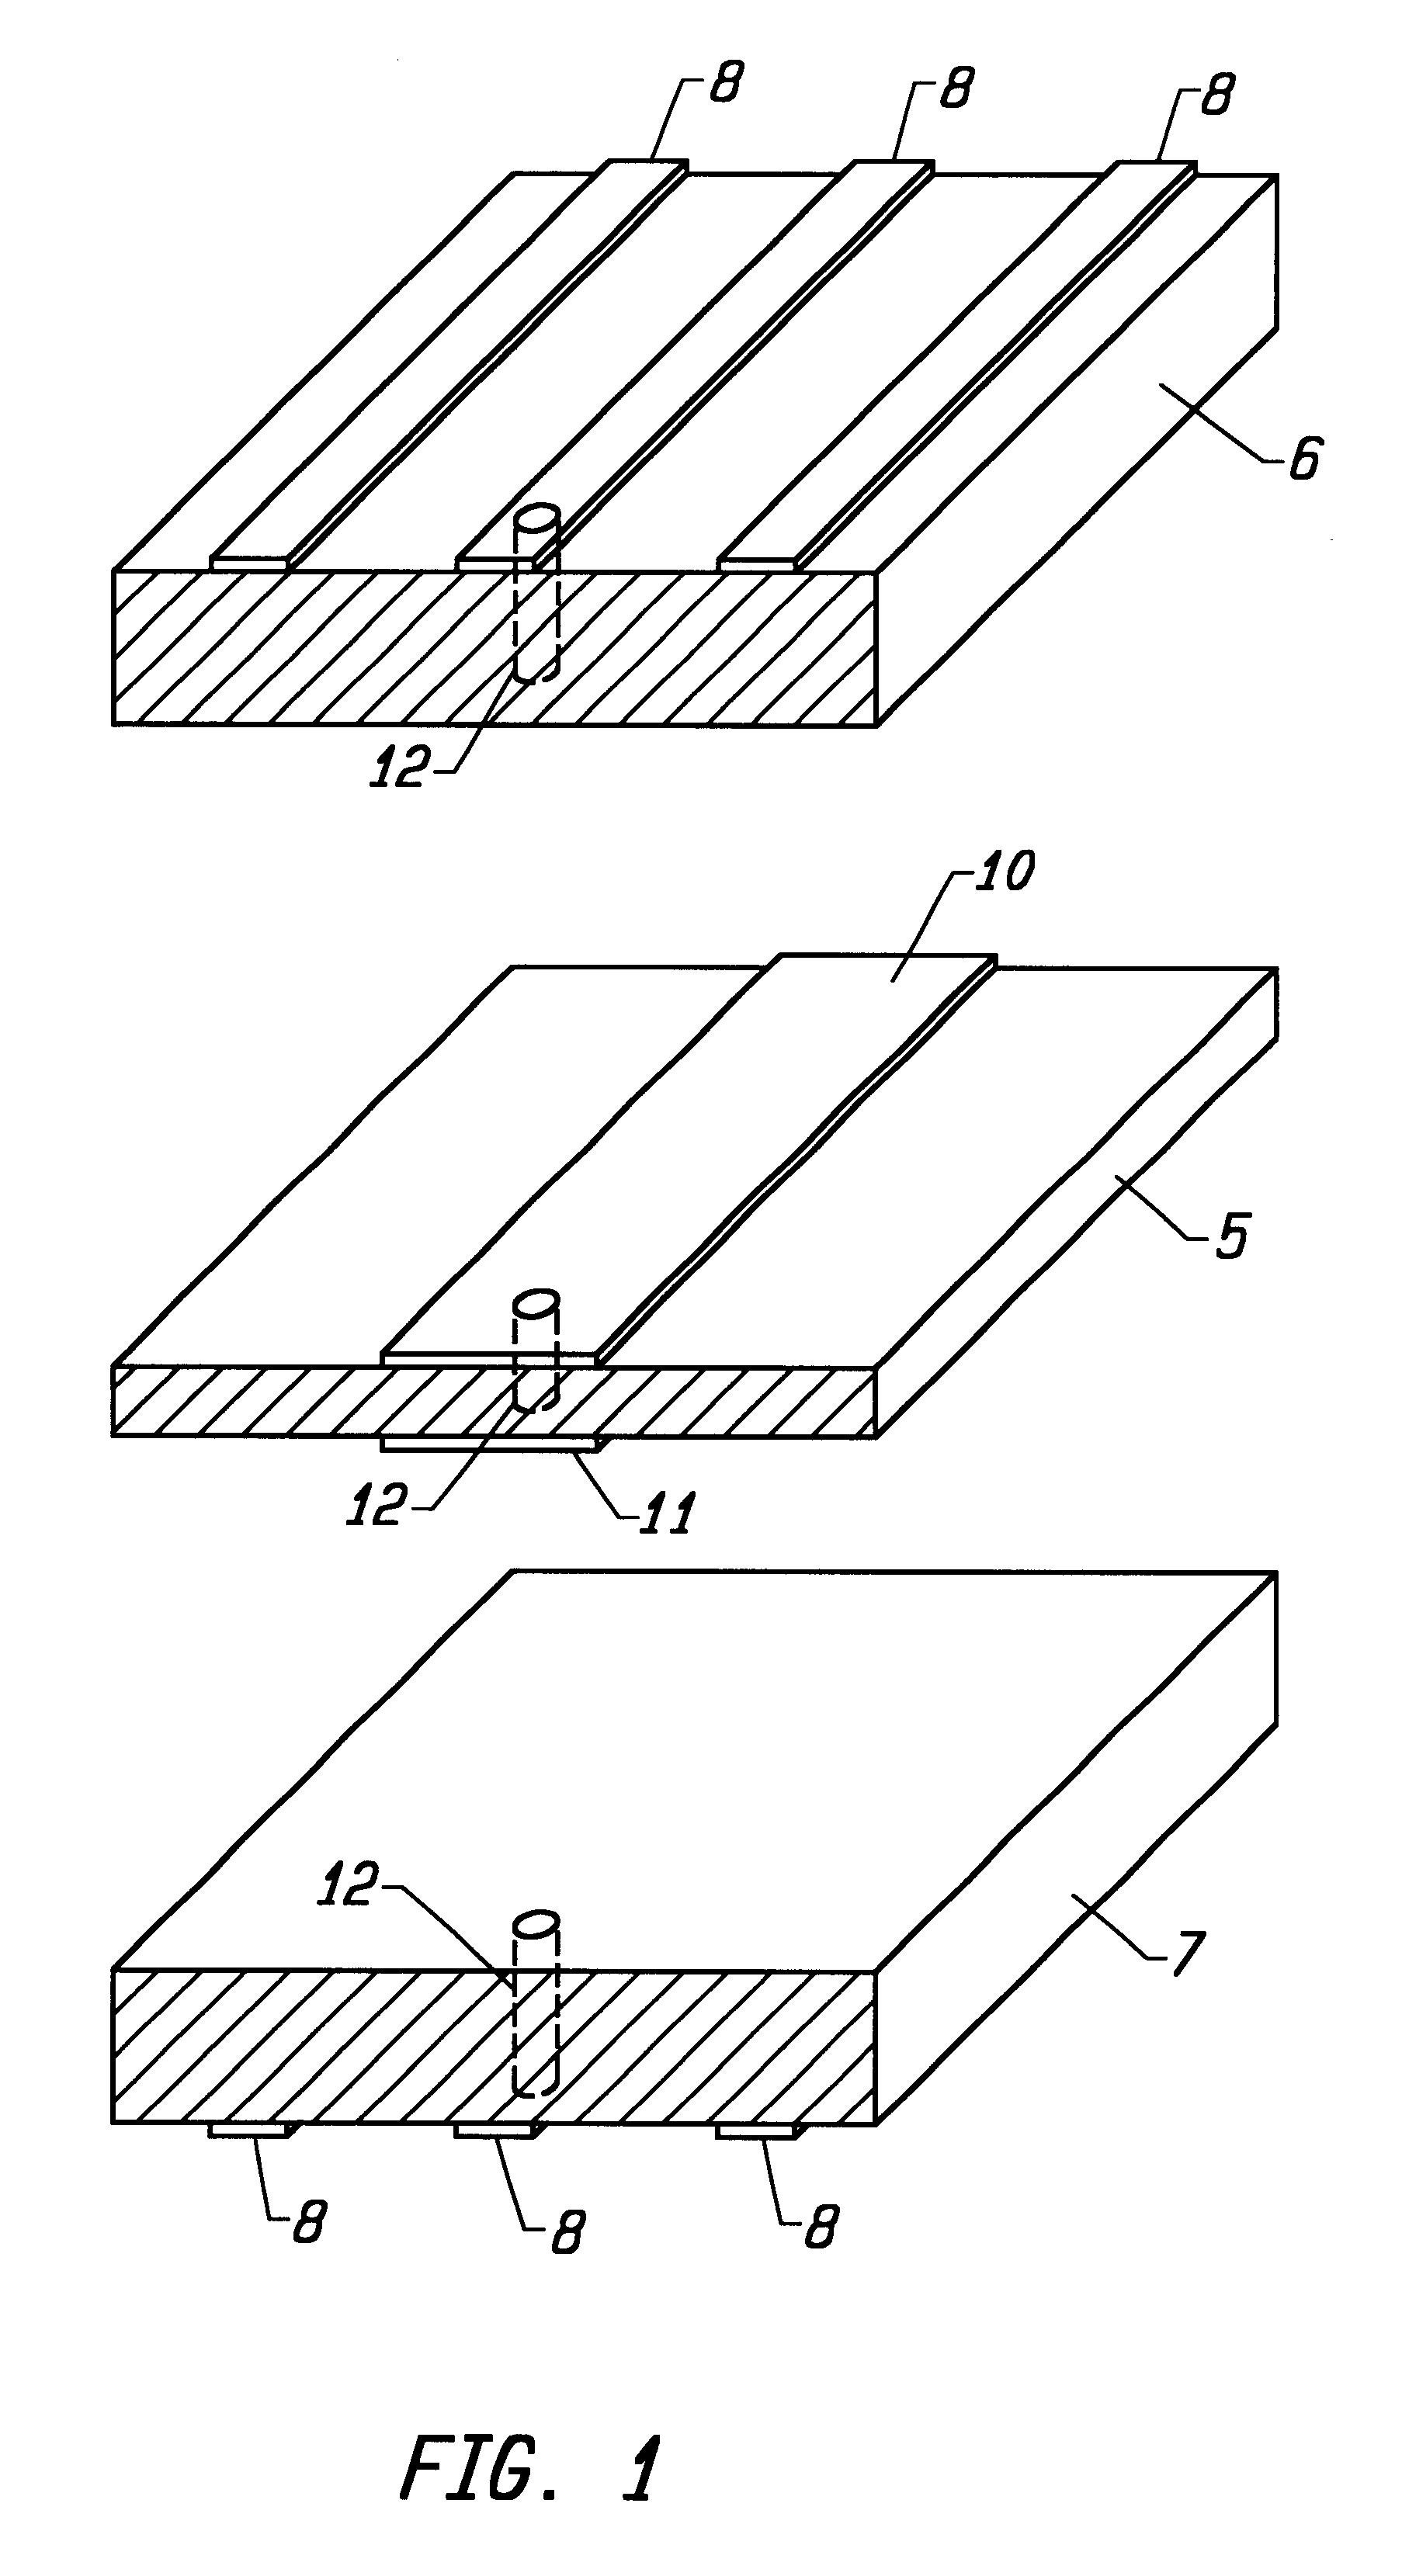 Multi-layer printed wiring board having integrated broadside microwave coupled baluns